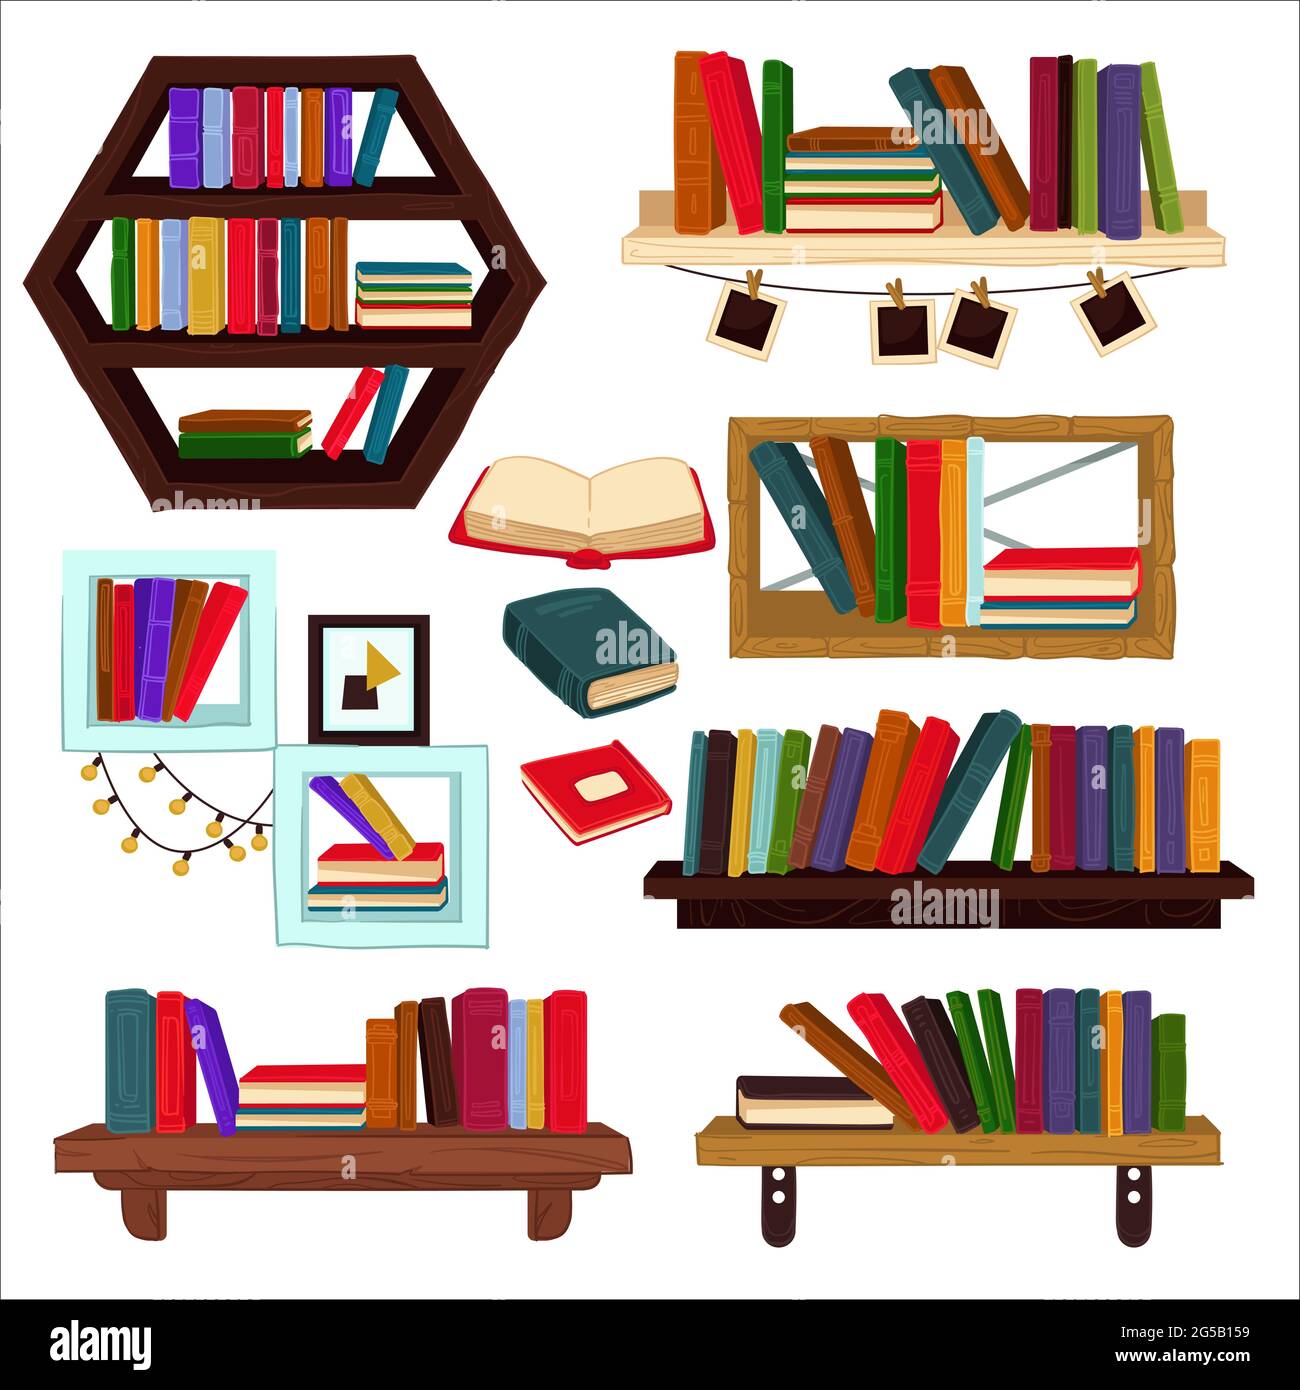 Books and textbooks on shelves, home furniture Stock Vector